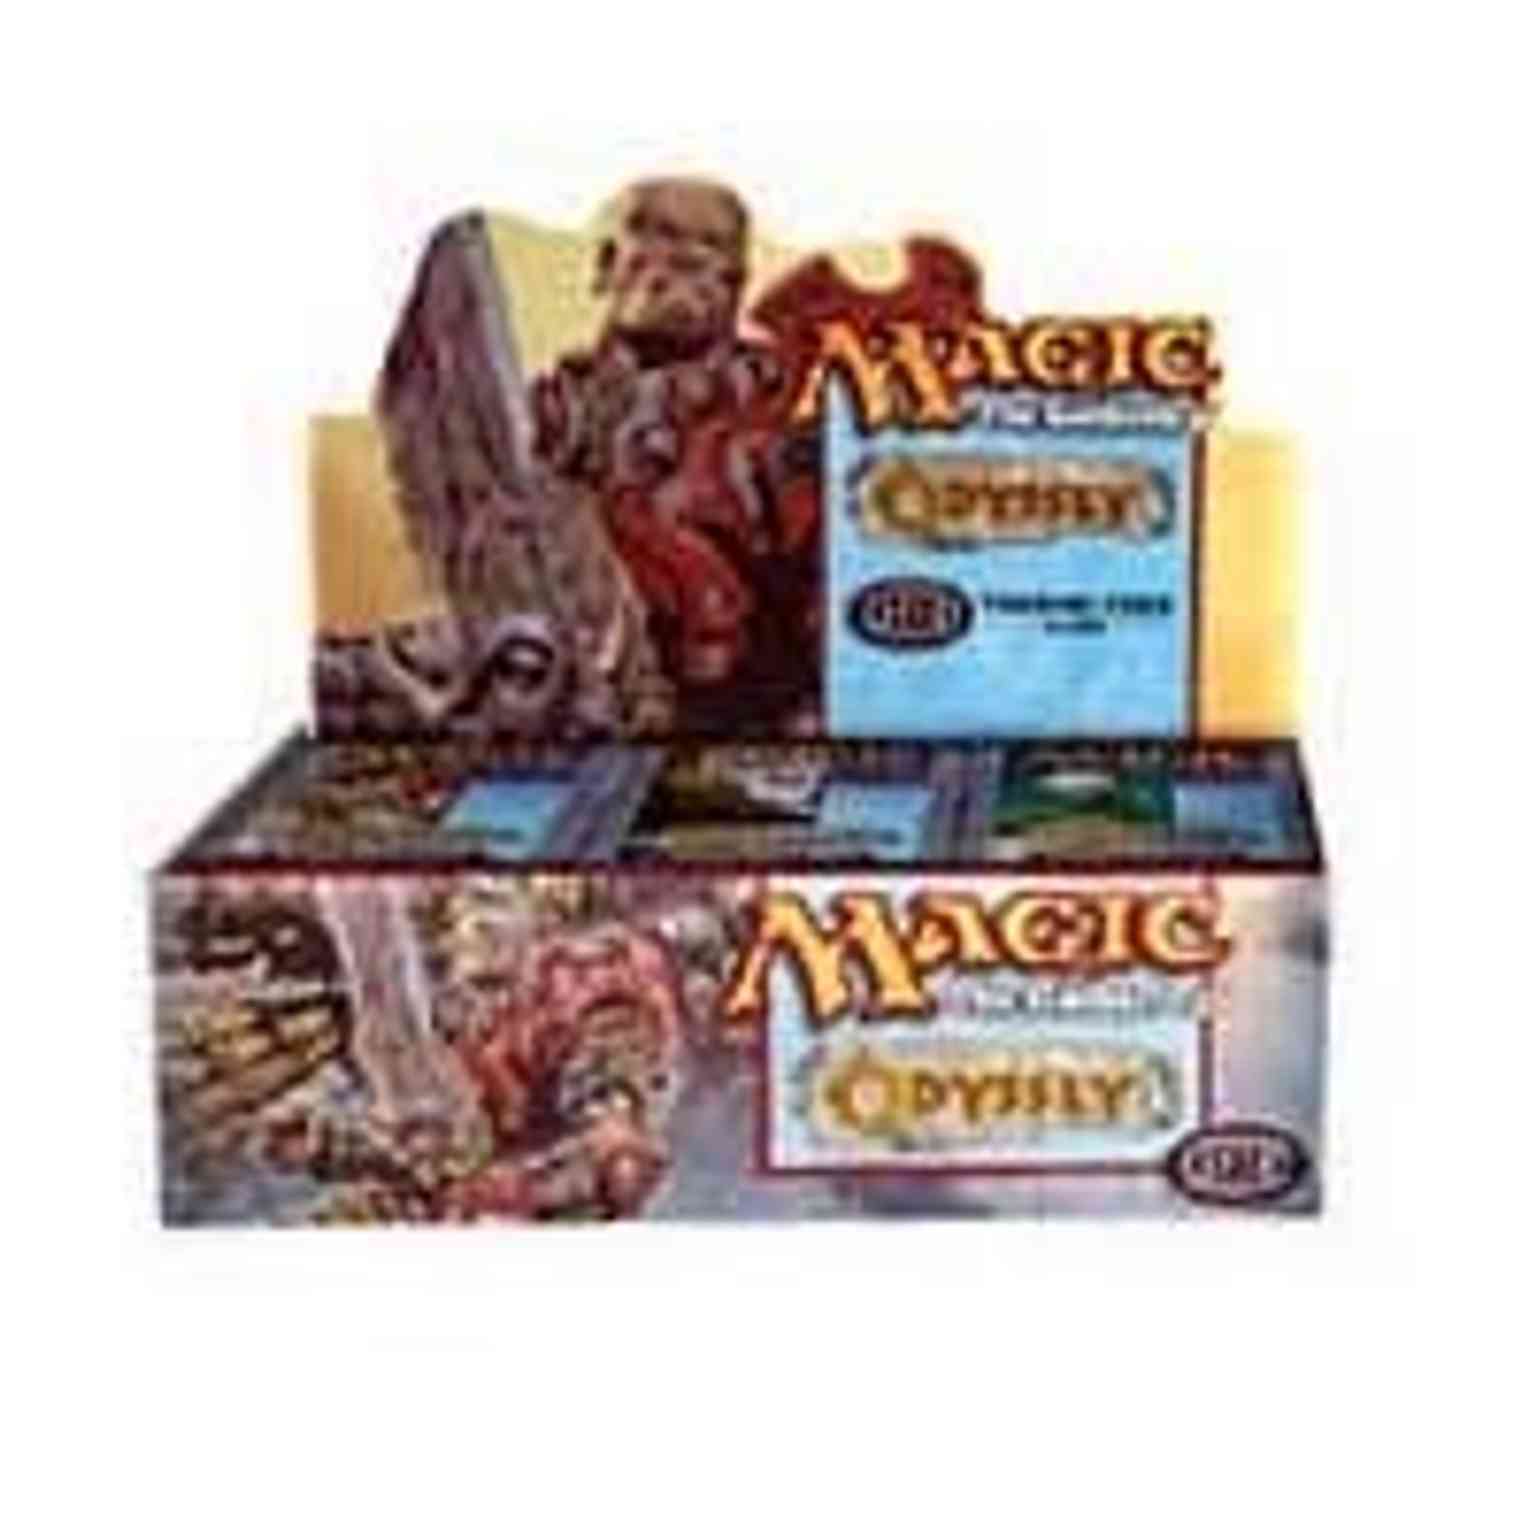 Odyssey - Booster Box magic card front